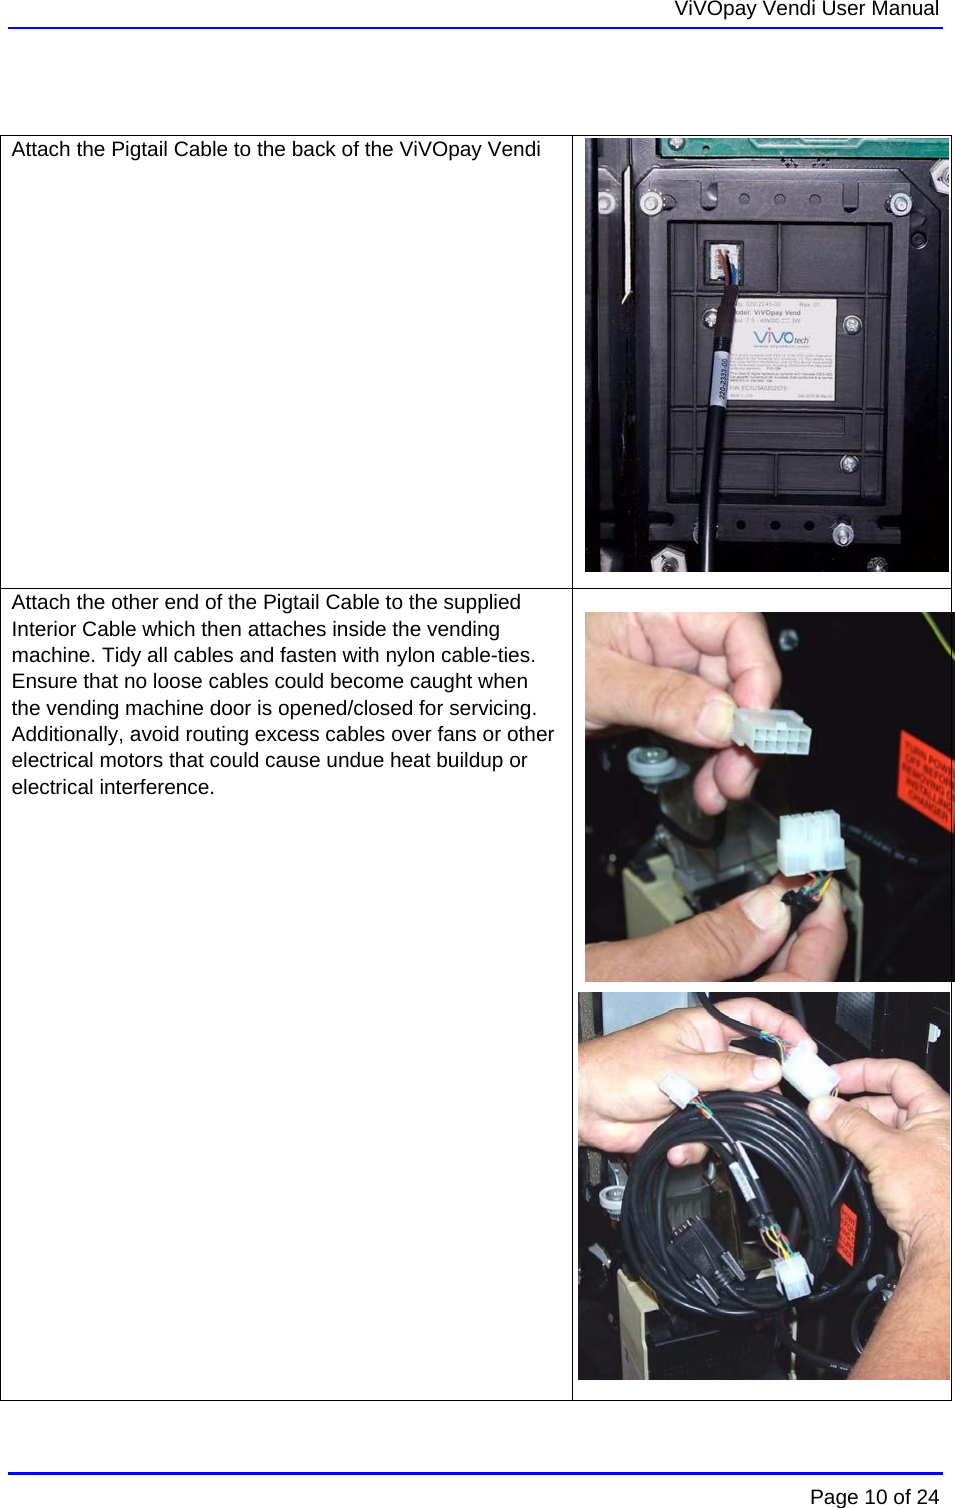   ViVOpay Vendi User Manual        Page 10 of 24     Attach the Pigtail Cable to the back of the ViVOpay Vendi   Attach the other end of the Pigtail Cable to the supplied Interior Cable which then attaches inside the vending machine. Tidy all cables and fasten with nylon cable-ties. Ensure that no loose cables could become caught when the vending machine door is opened/closed for servicing. Additionally, avoid routing excess cables over fans or other electrical motors that could cause undue heat buildup or electrical interference.    